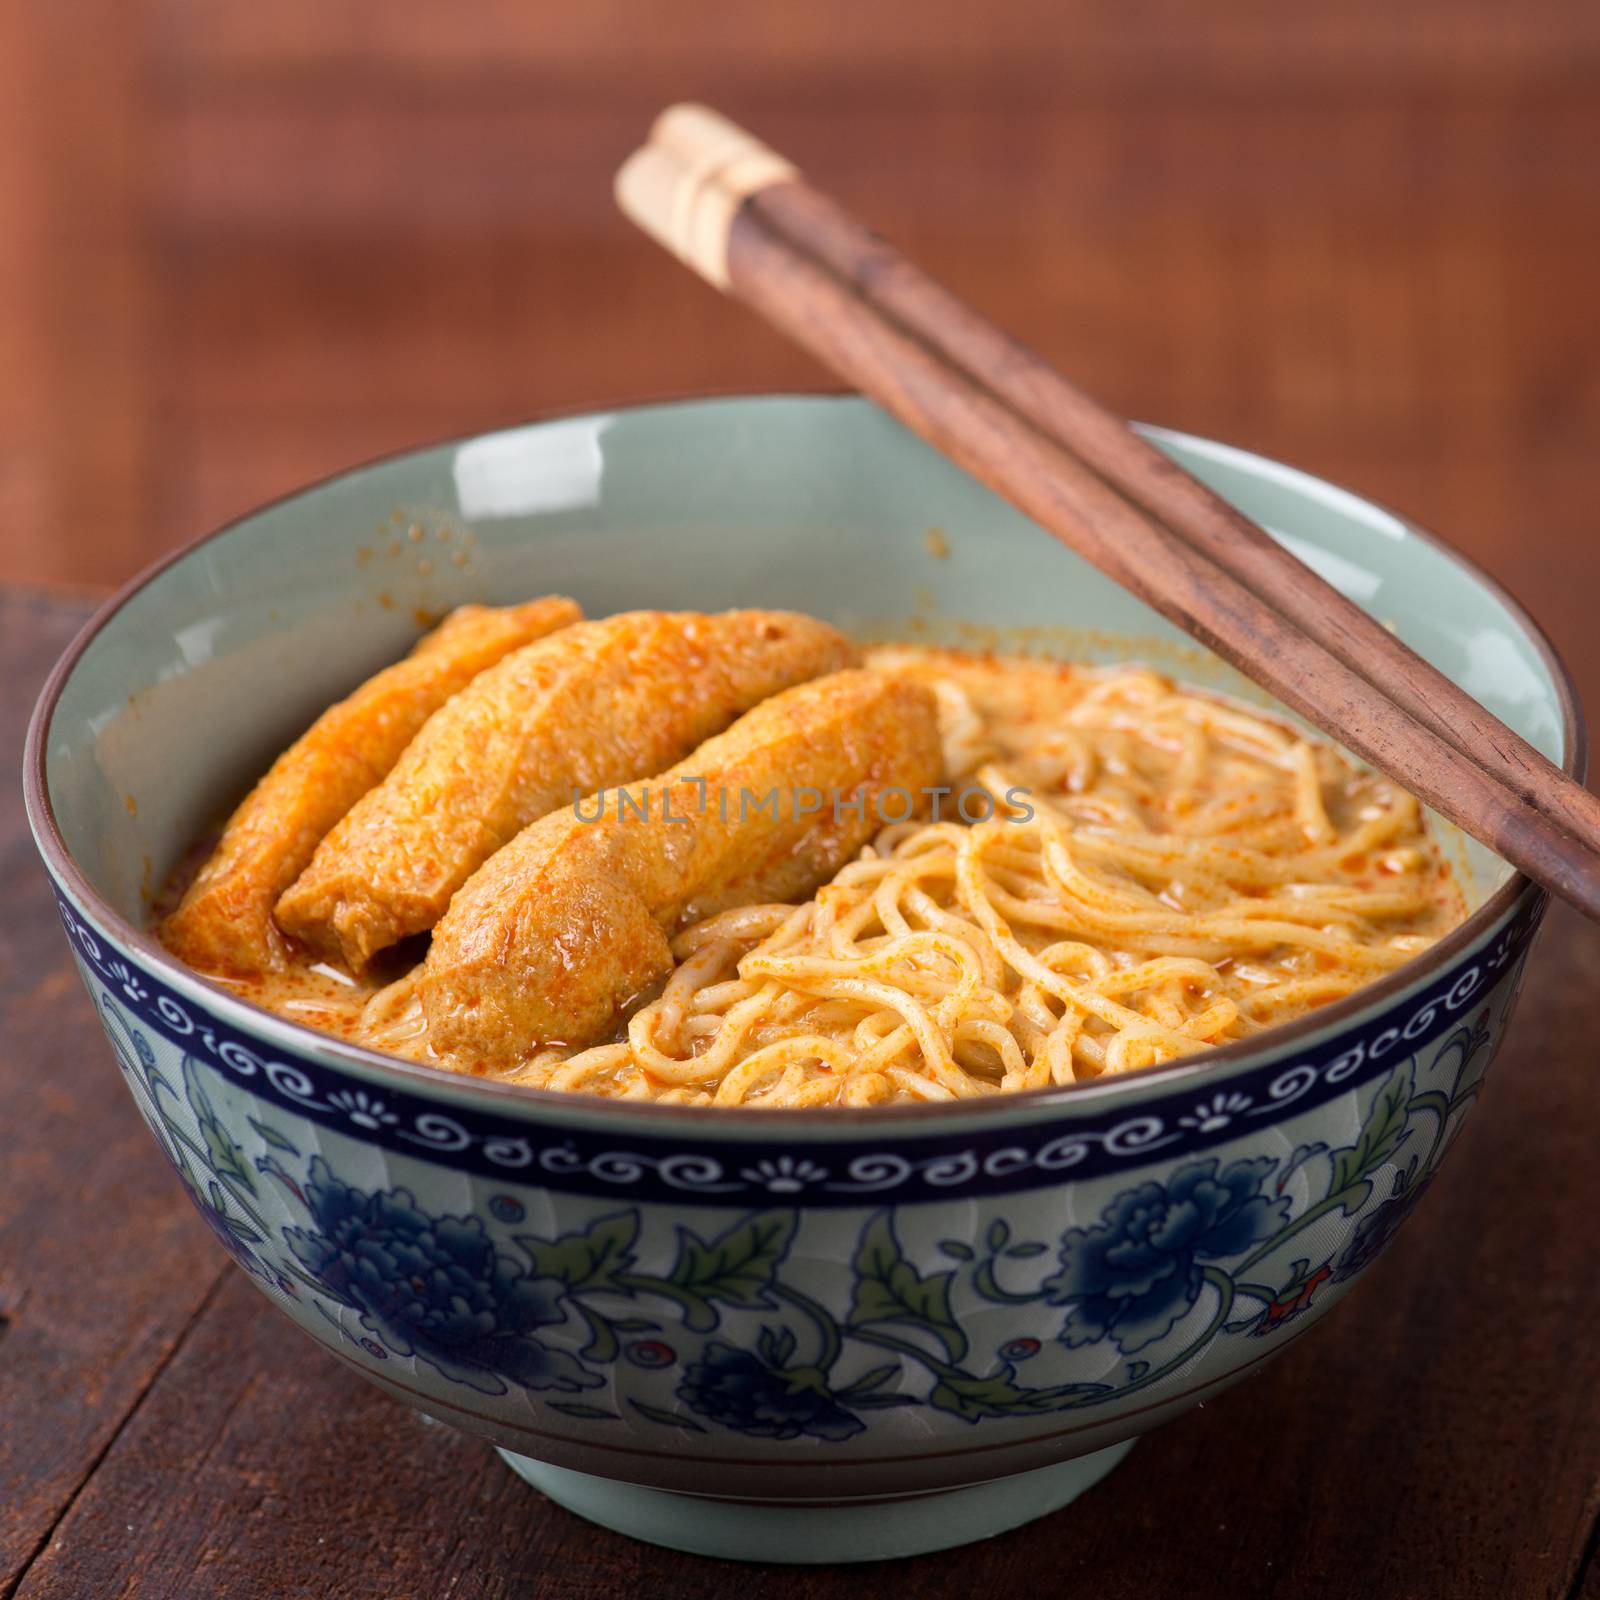 Hot and spicy curry noodle with chopsticks on the table, popular foods in Asia.